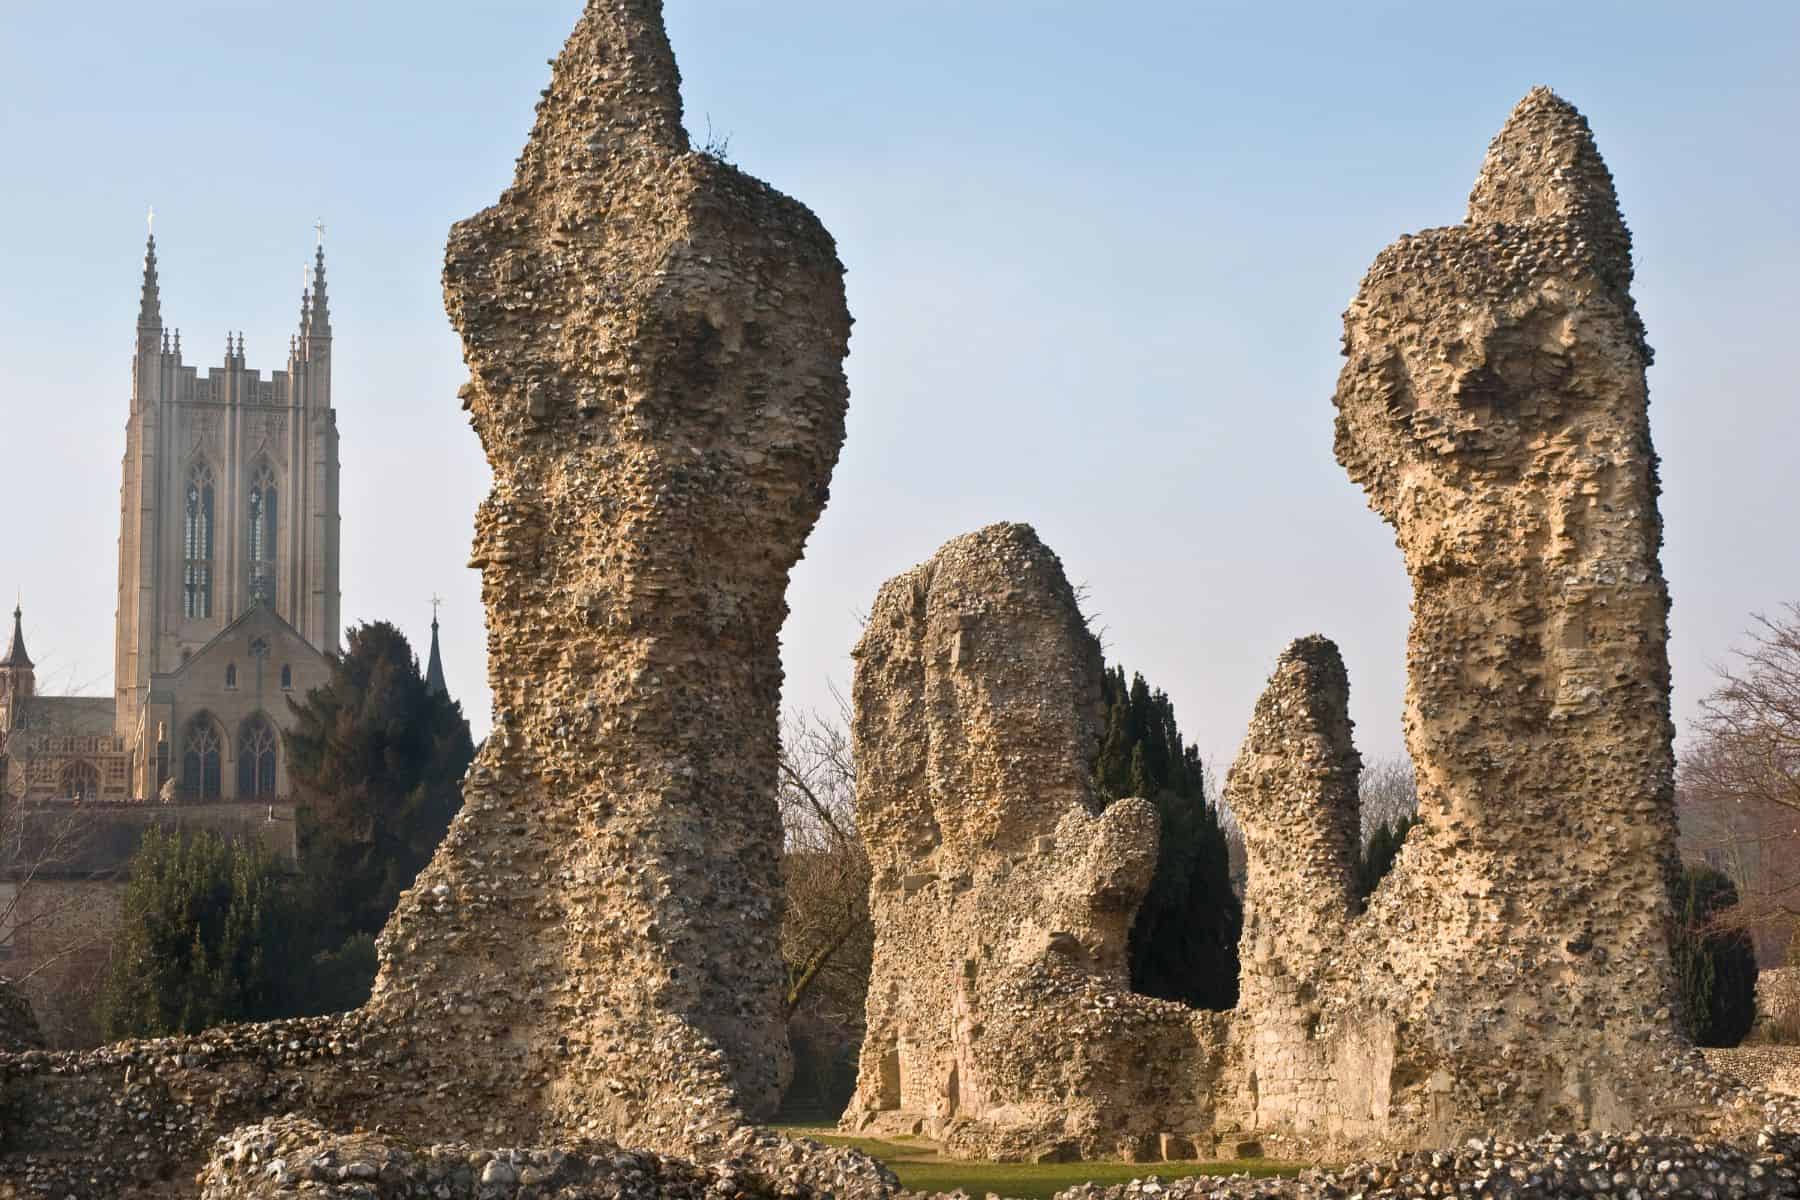 The ruins of the abbey of Bury St Edmunds, Suffolk